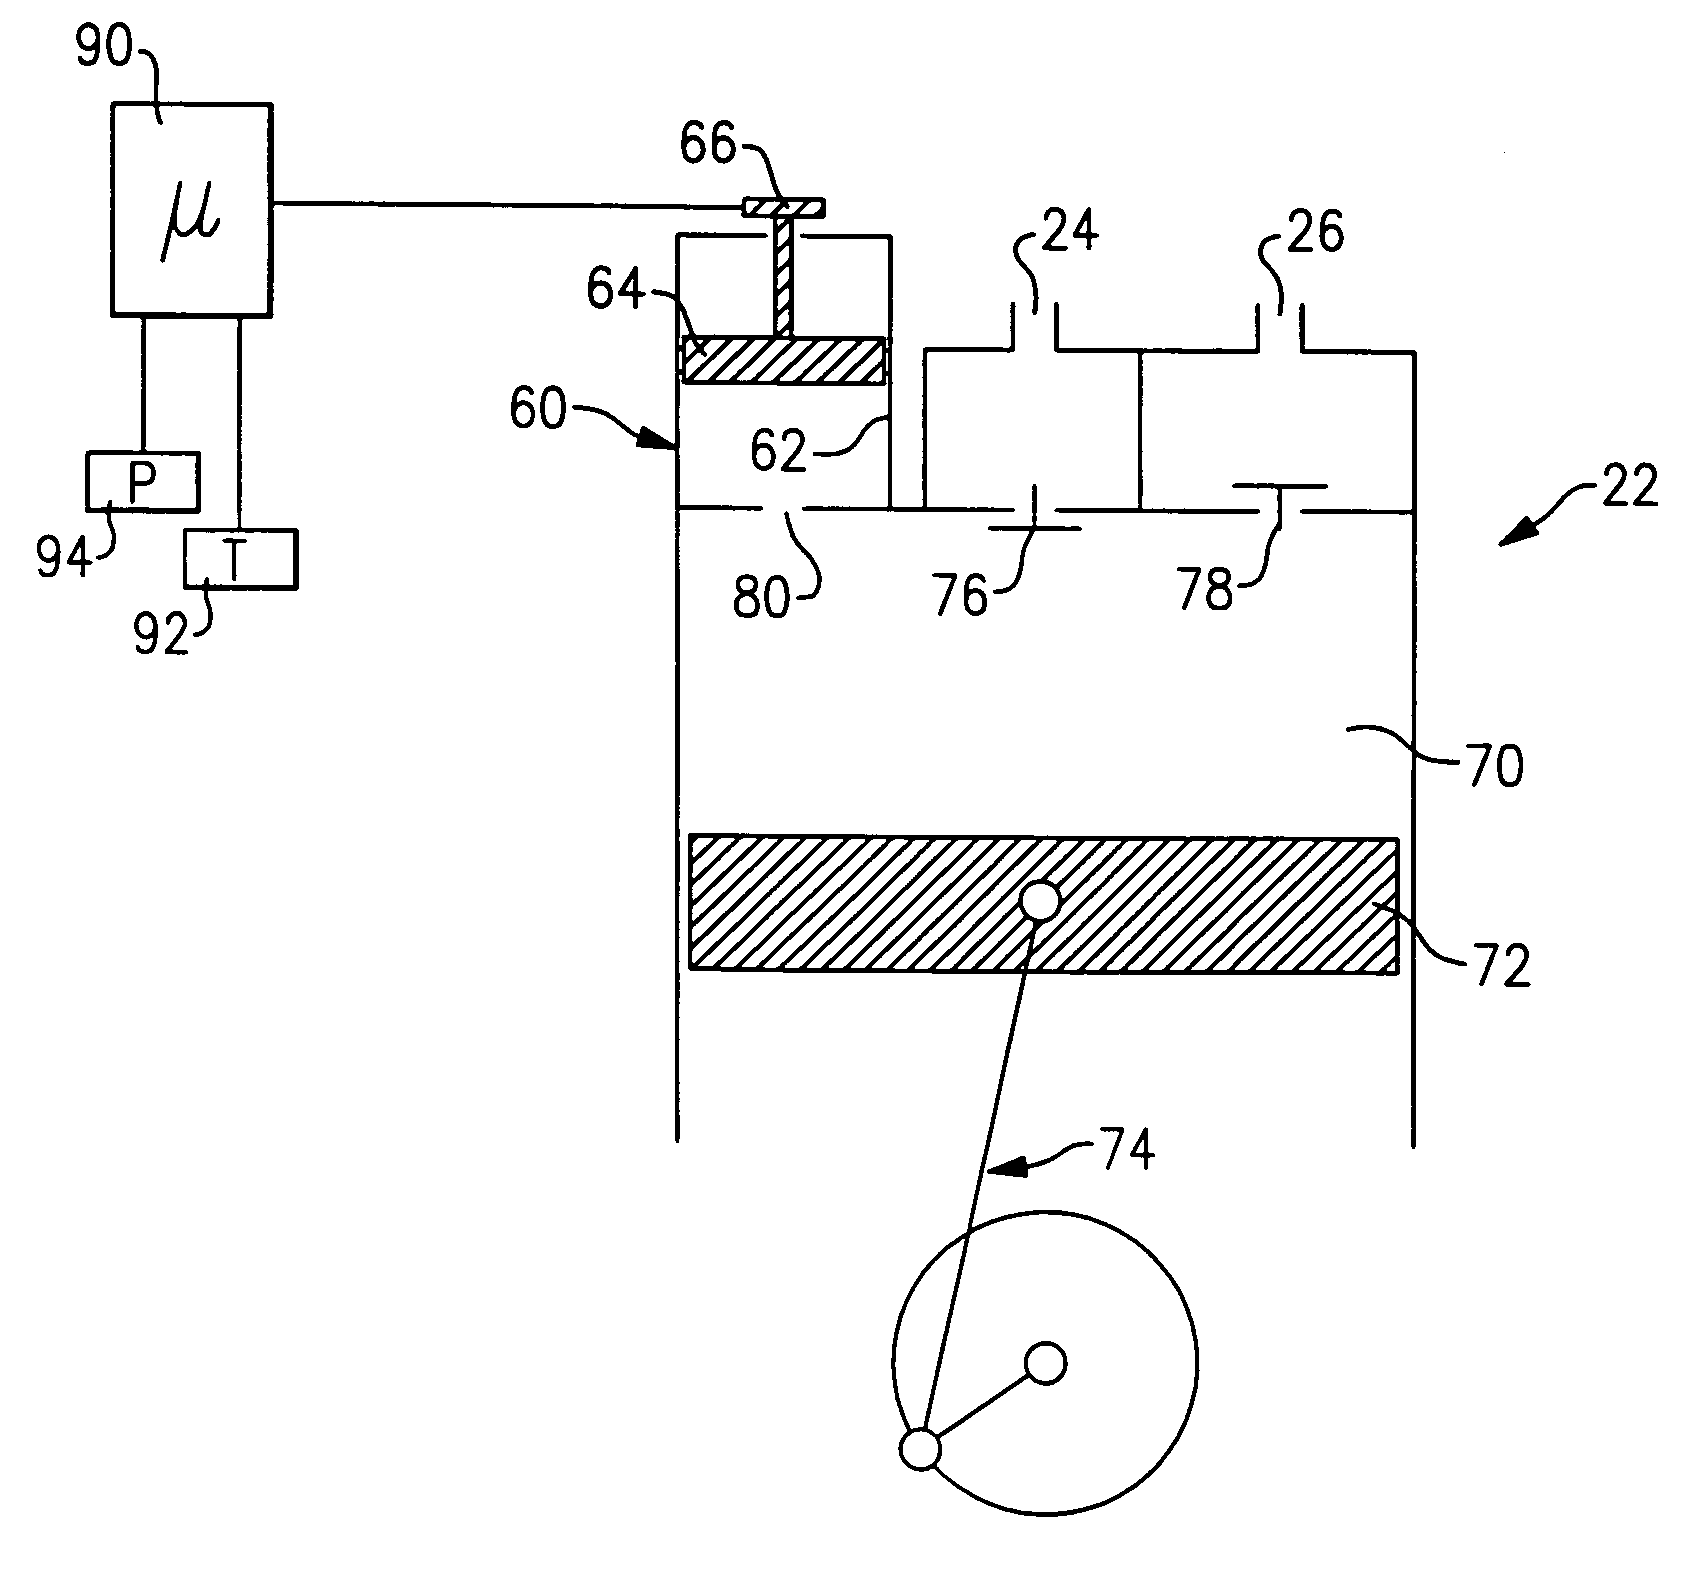 Heat pump water heating system including a compressor having a variable clearance volume